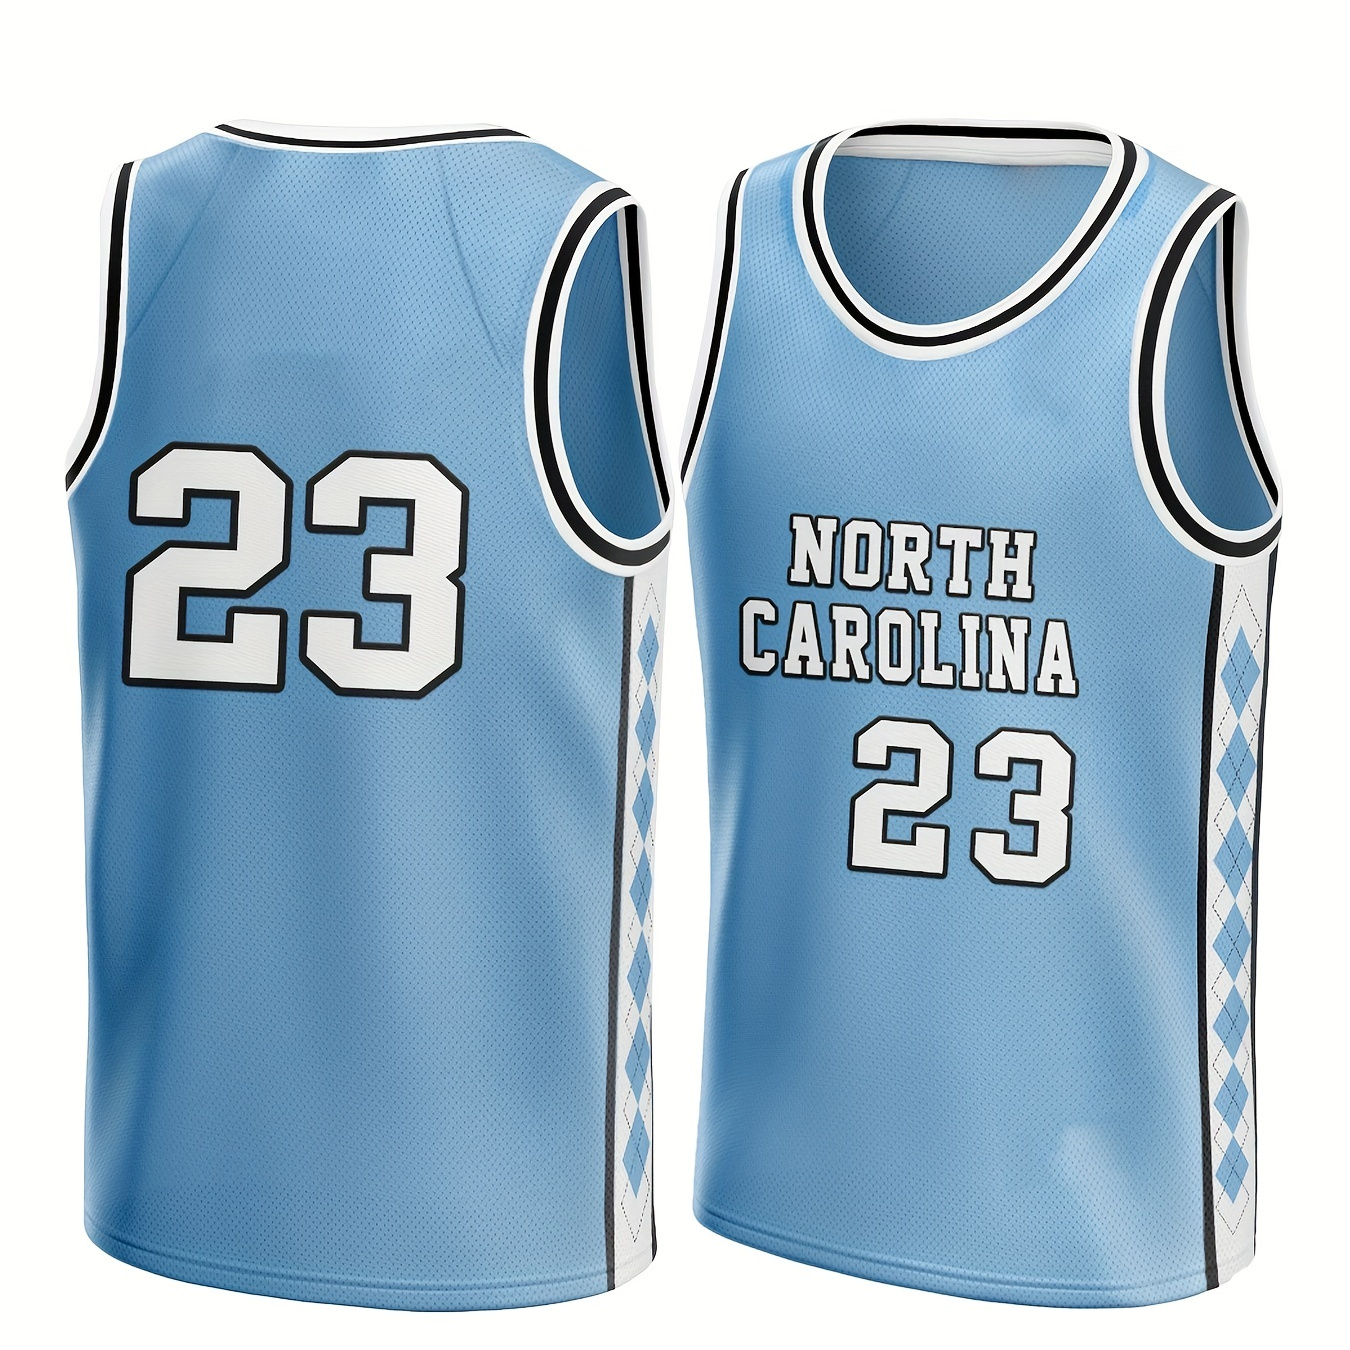 

Men's North Carolina #23 Embroidery Basketball Jersey, Vintage Breathable Round Neck Sleeveless Basketball Shirt For Training Competition